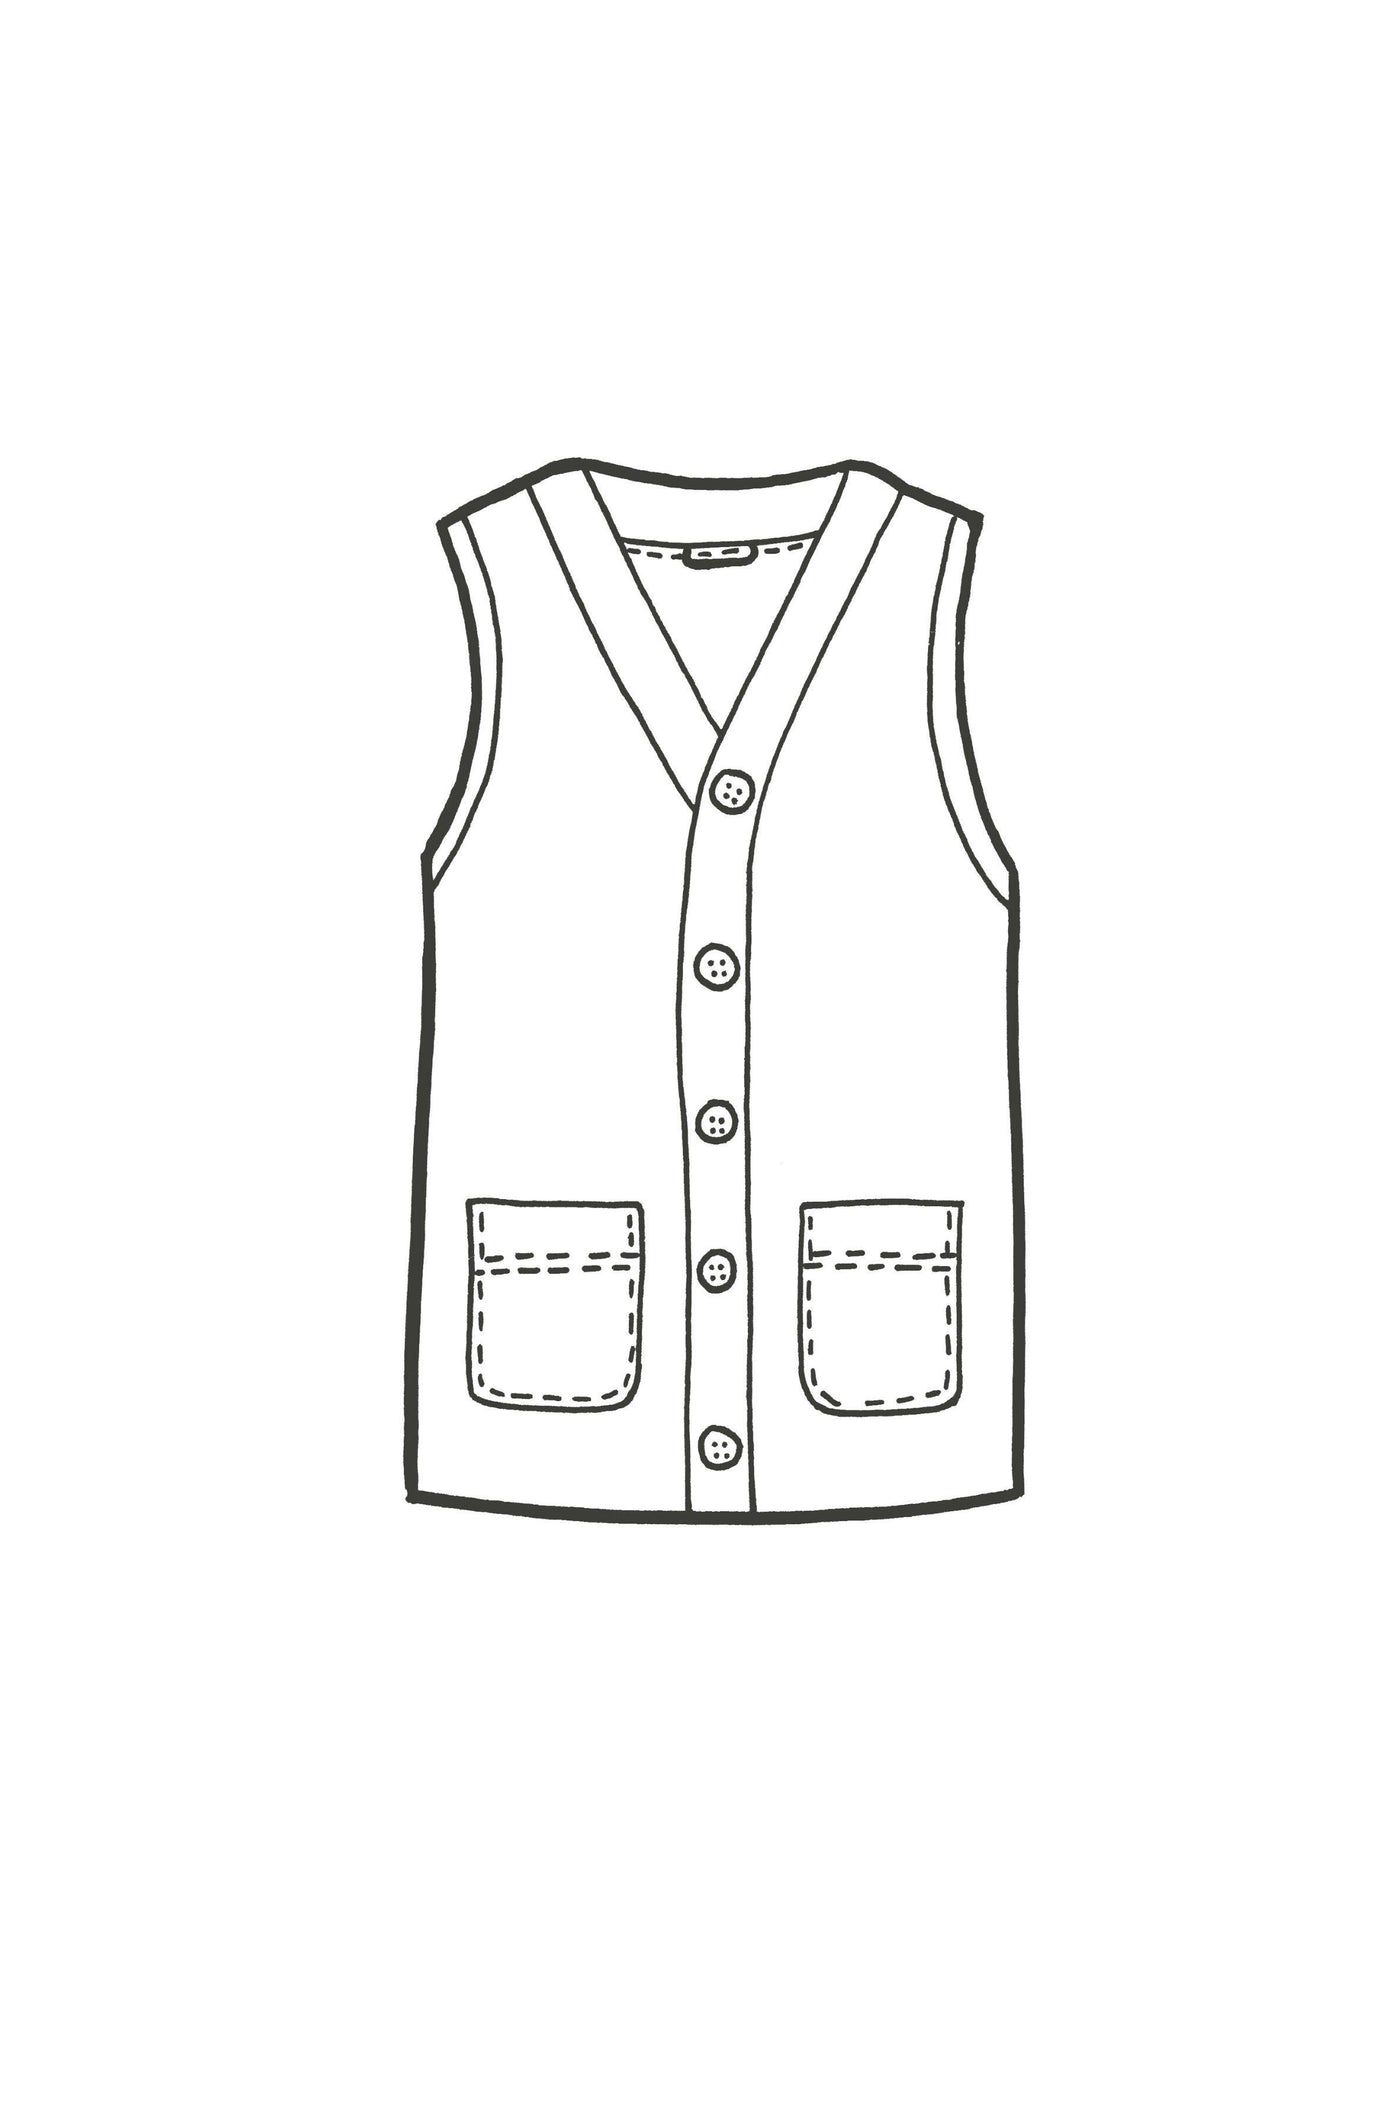 Sketch of vest made by Author Clothing.